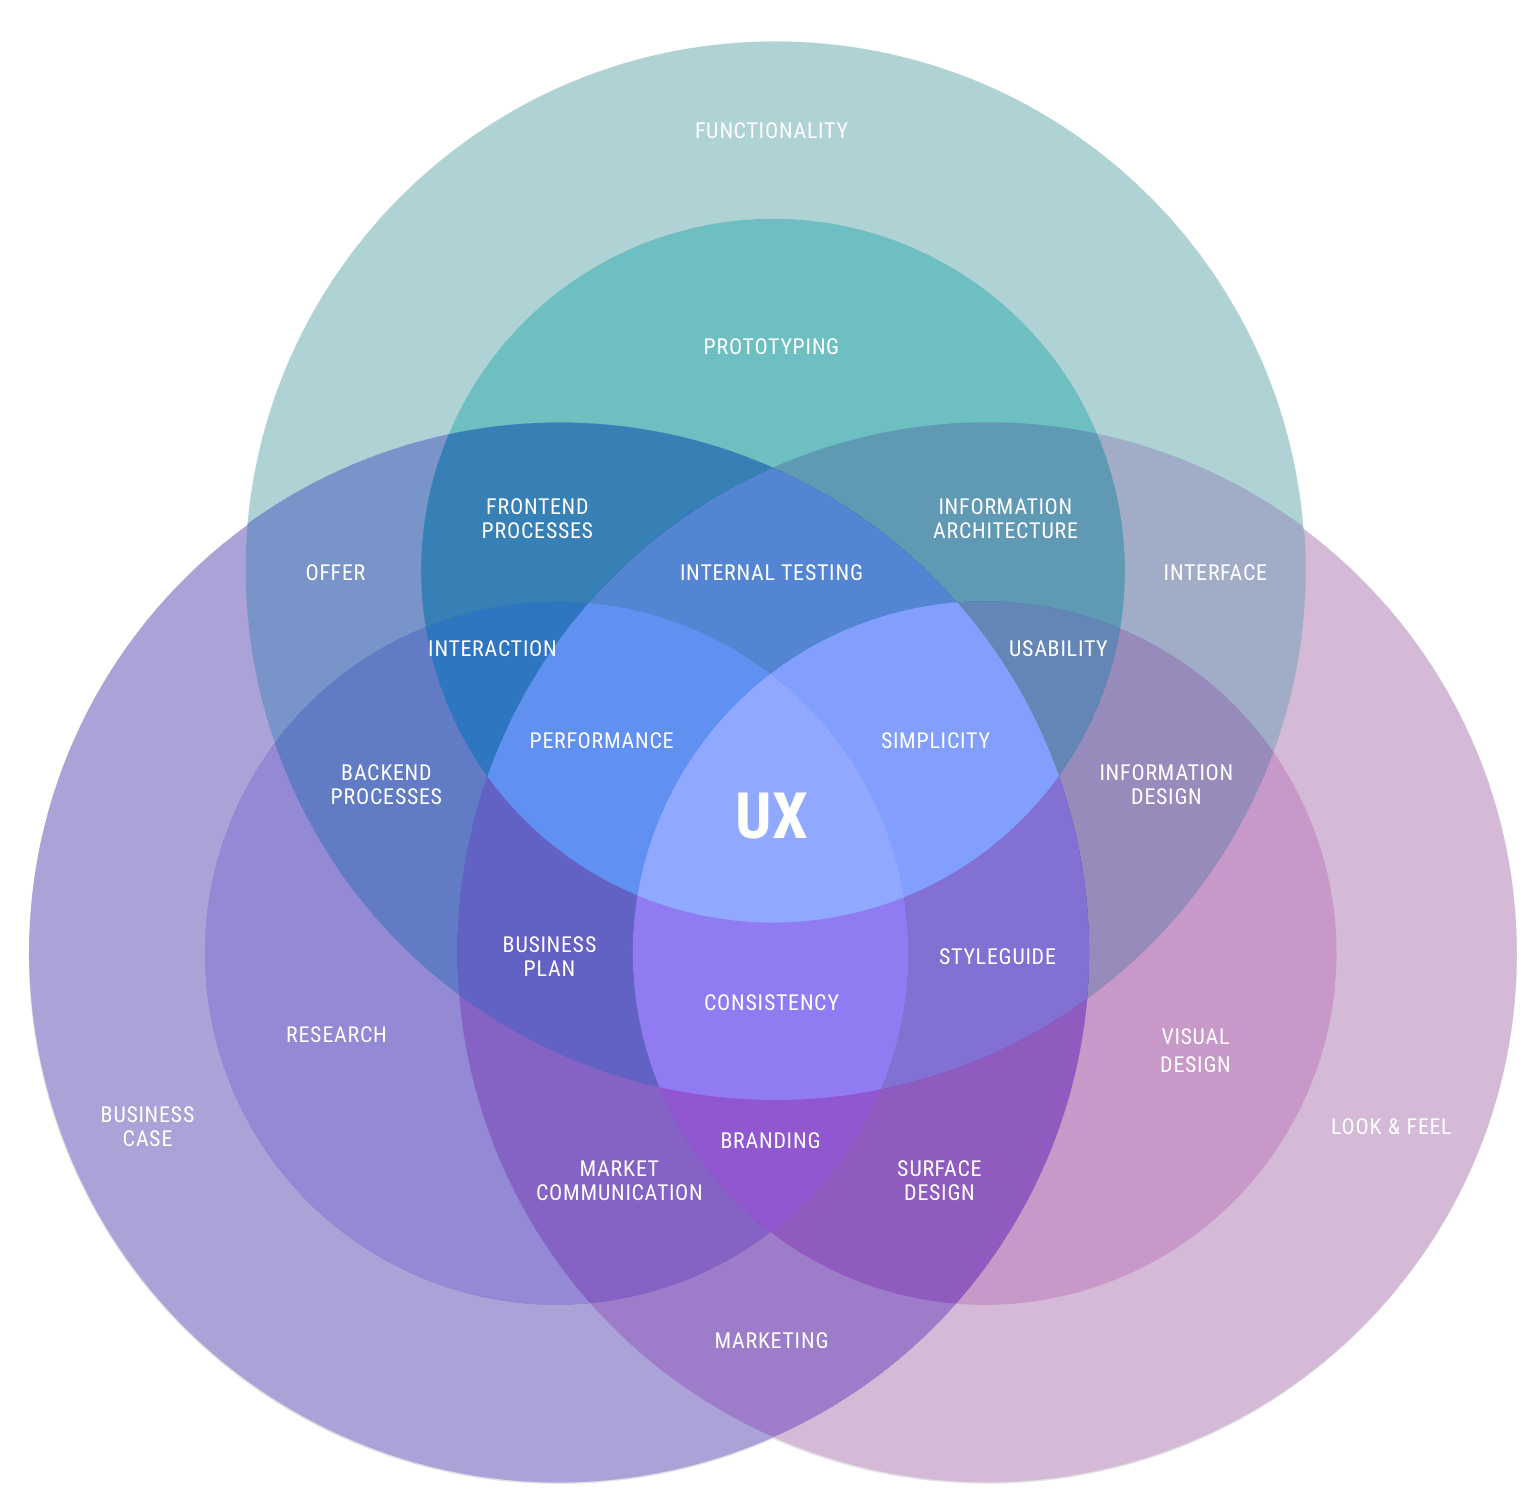 A complex venn diagram breaking down UX into the key areas of function, design, and business needs